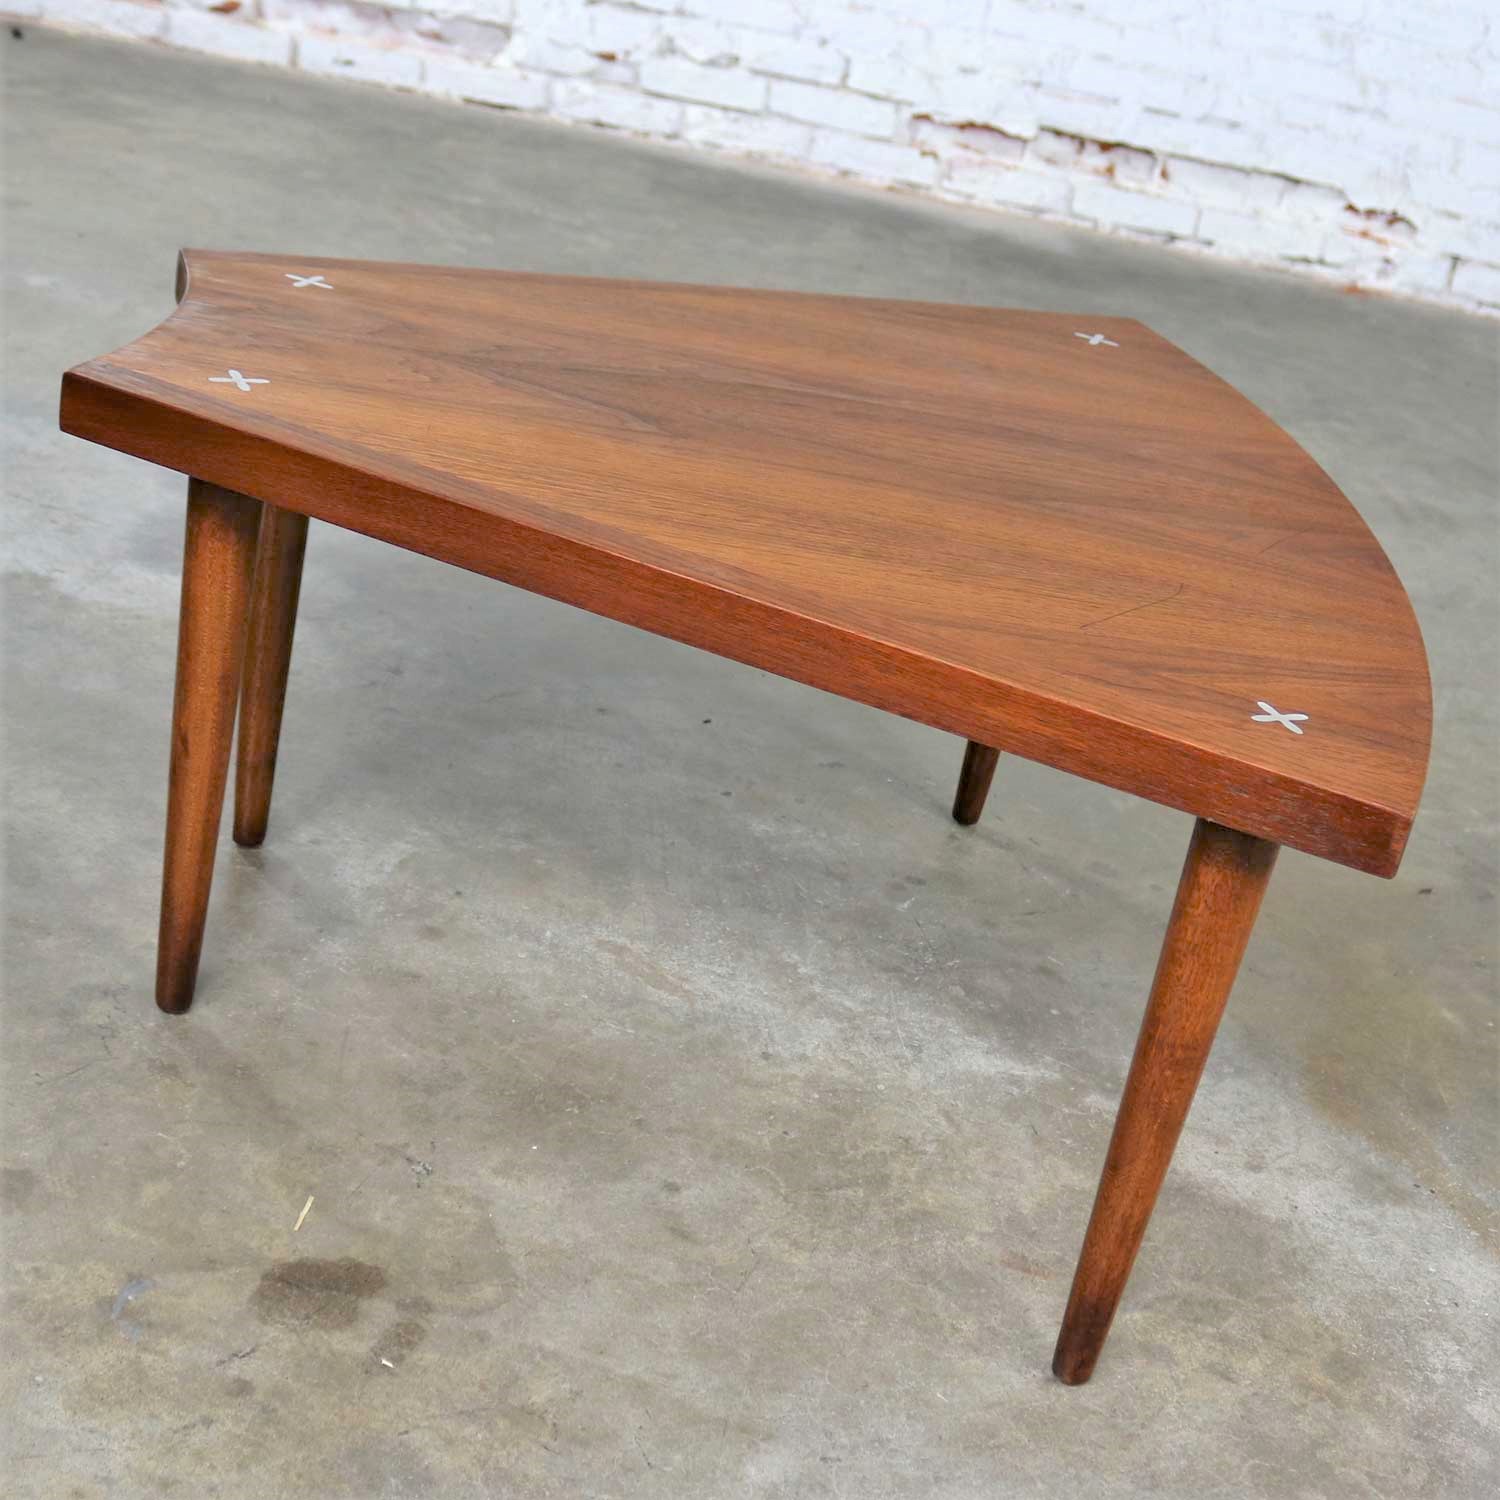 Walnut Wedge Shape End Table Attributed to Merton Gershun for American of Martinsville